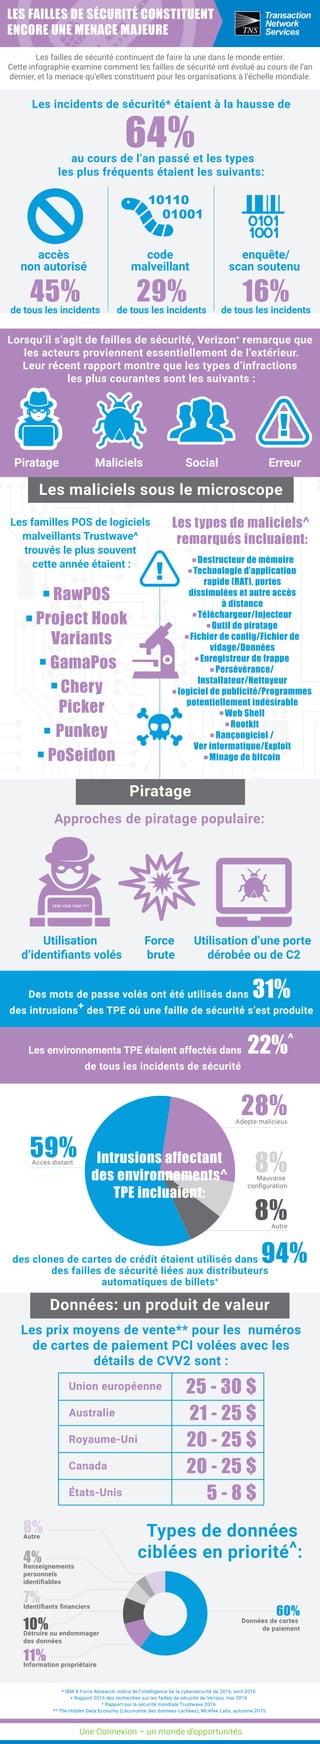 TNS Data Breach Facts Infographic - French